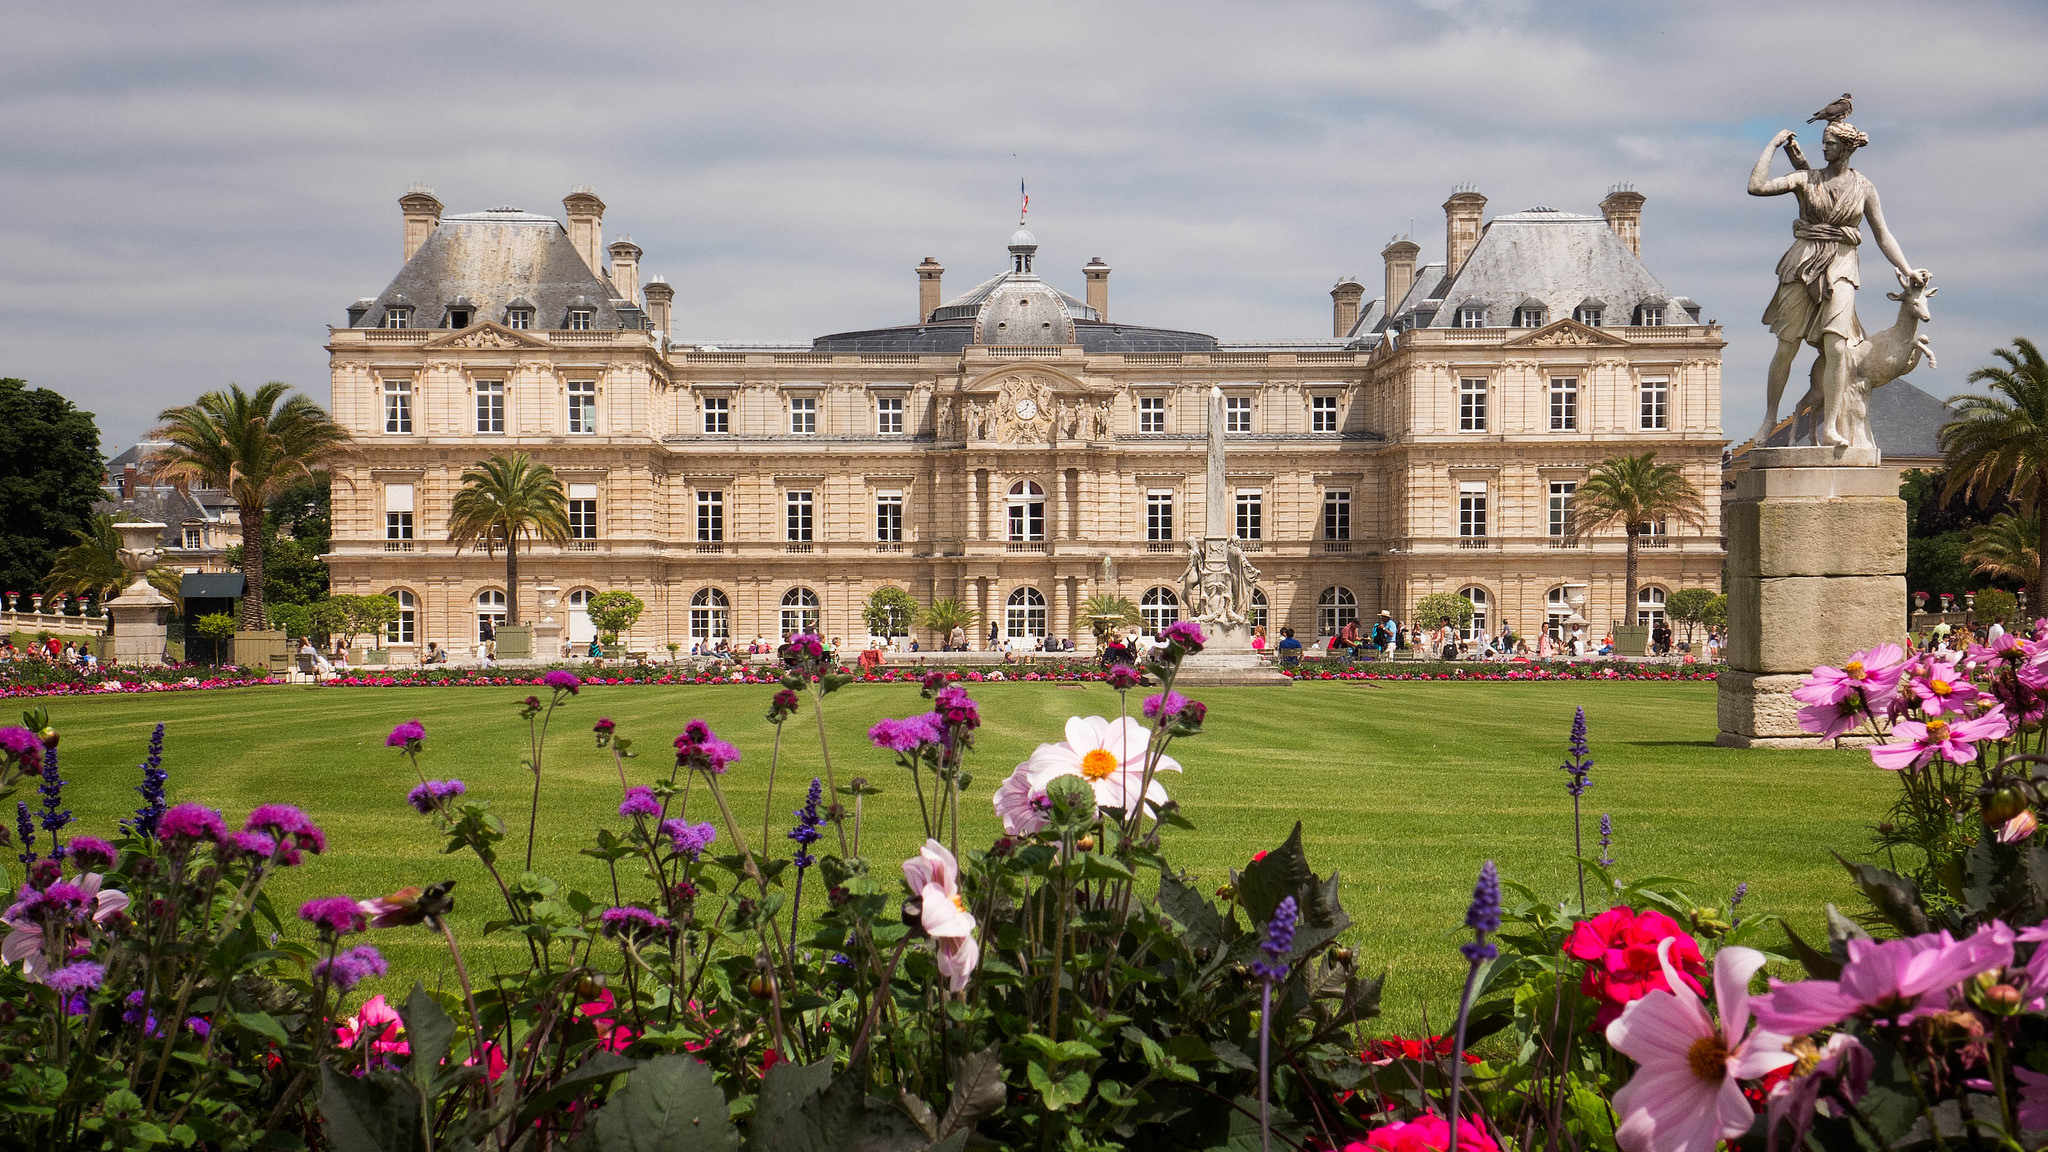 Luxembourg Palace Paris France HD Wallpaper Background Image